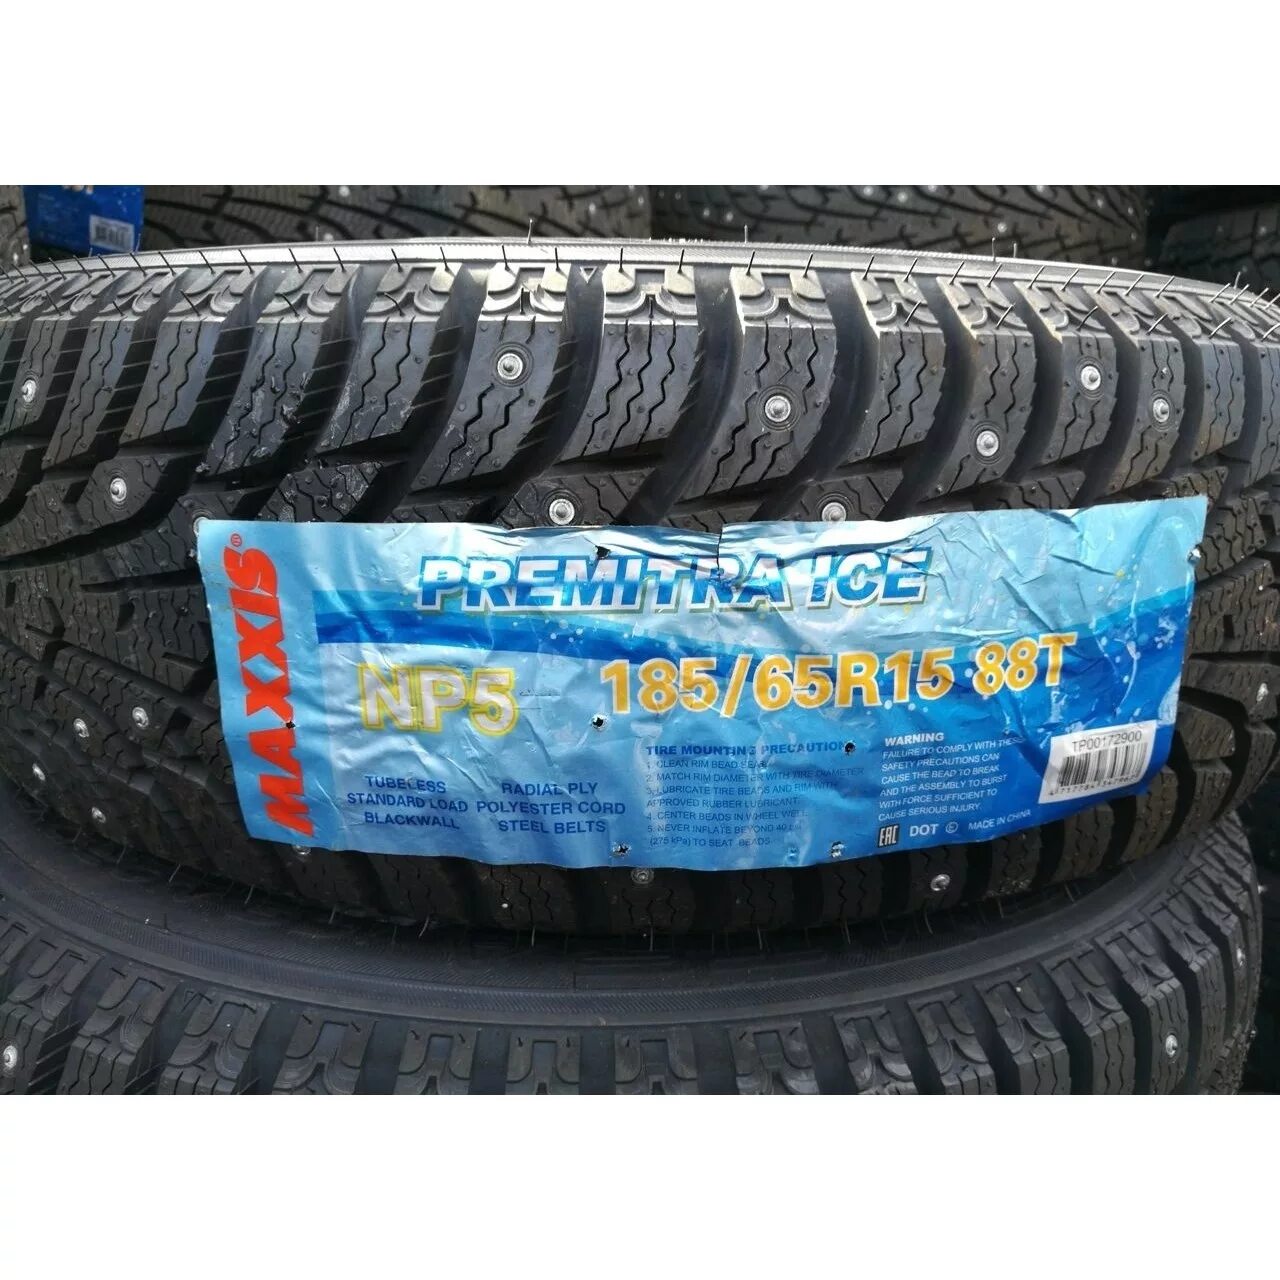 Резина зимняя np5 Максис. Maxxis np5 Premitra Ice Nord. Maxxis Nord np5. Шина Maxxis np5 Premitra Ice Nord 185/65r15 88t.